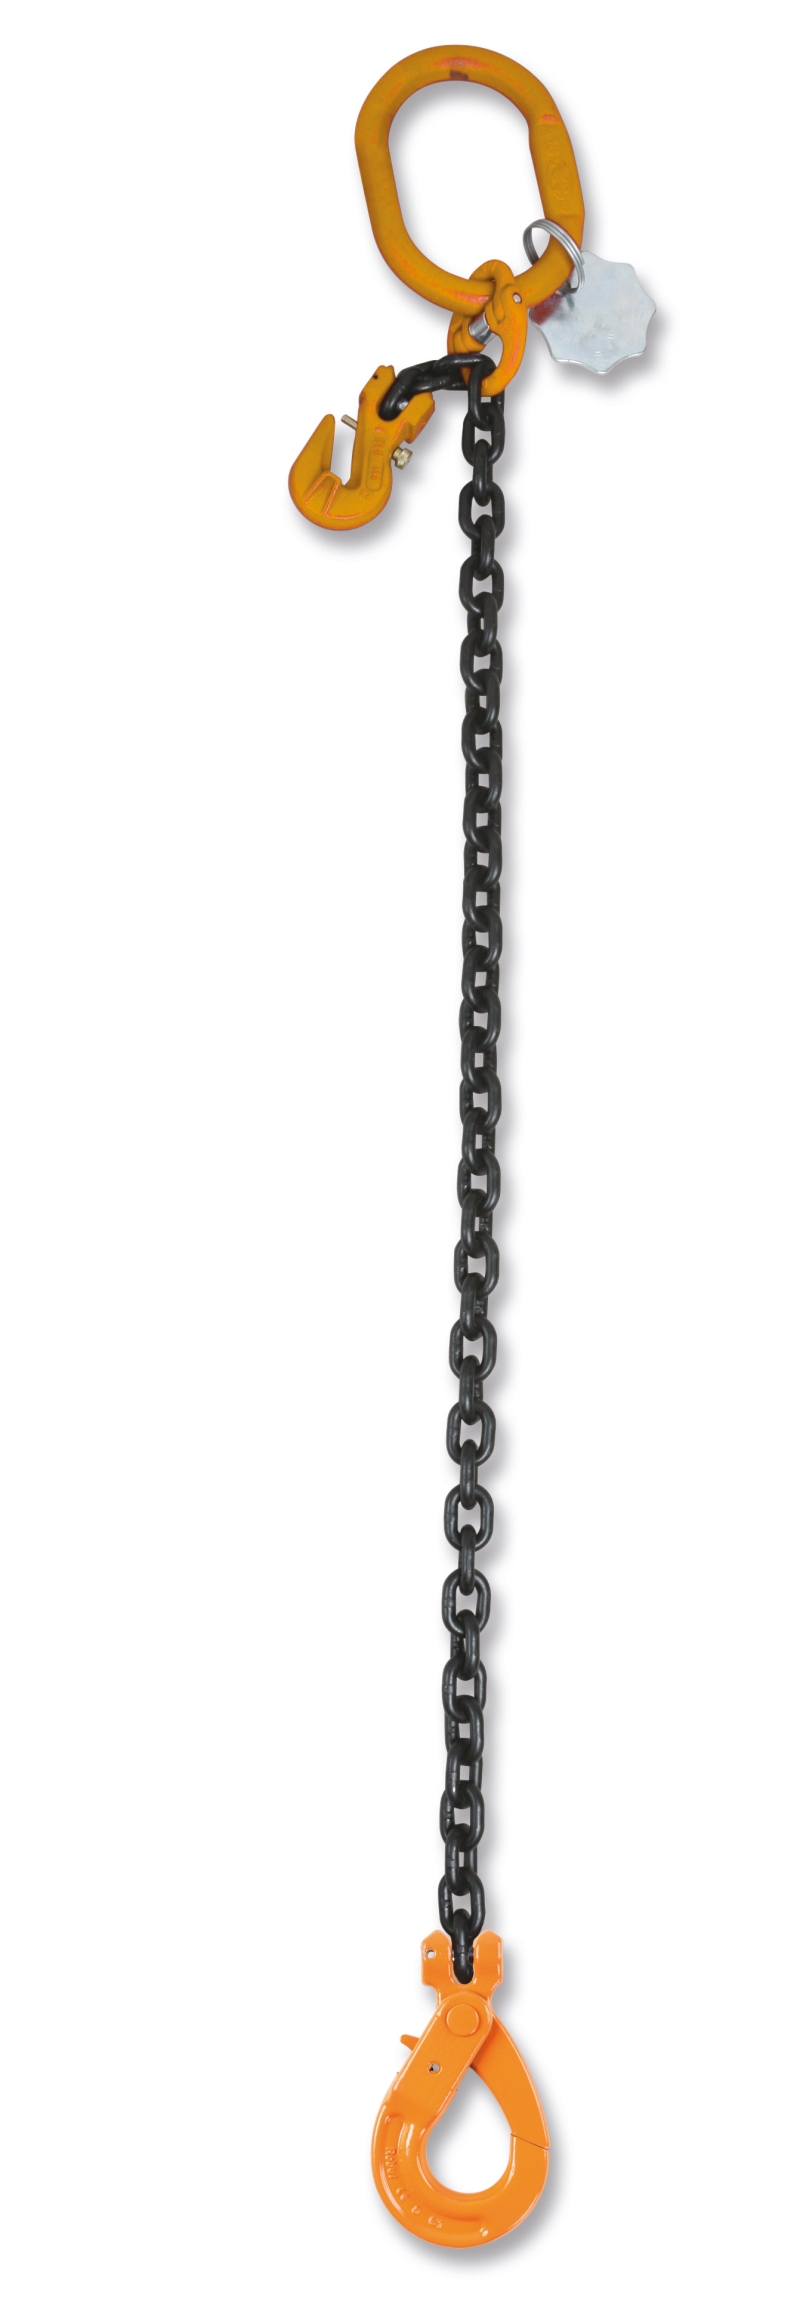 Lifting chain slings, 1 leg, with self-locking and clevis grab hooks, grade 8 category image